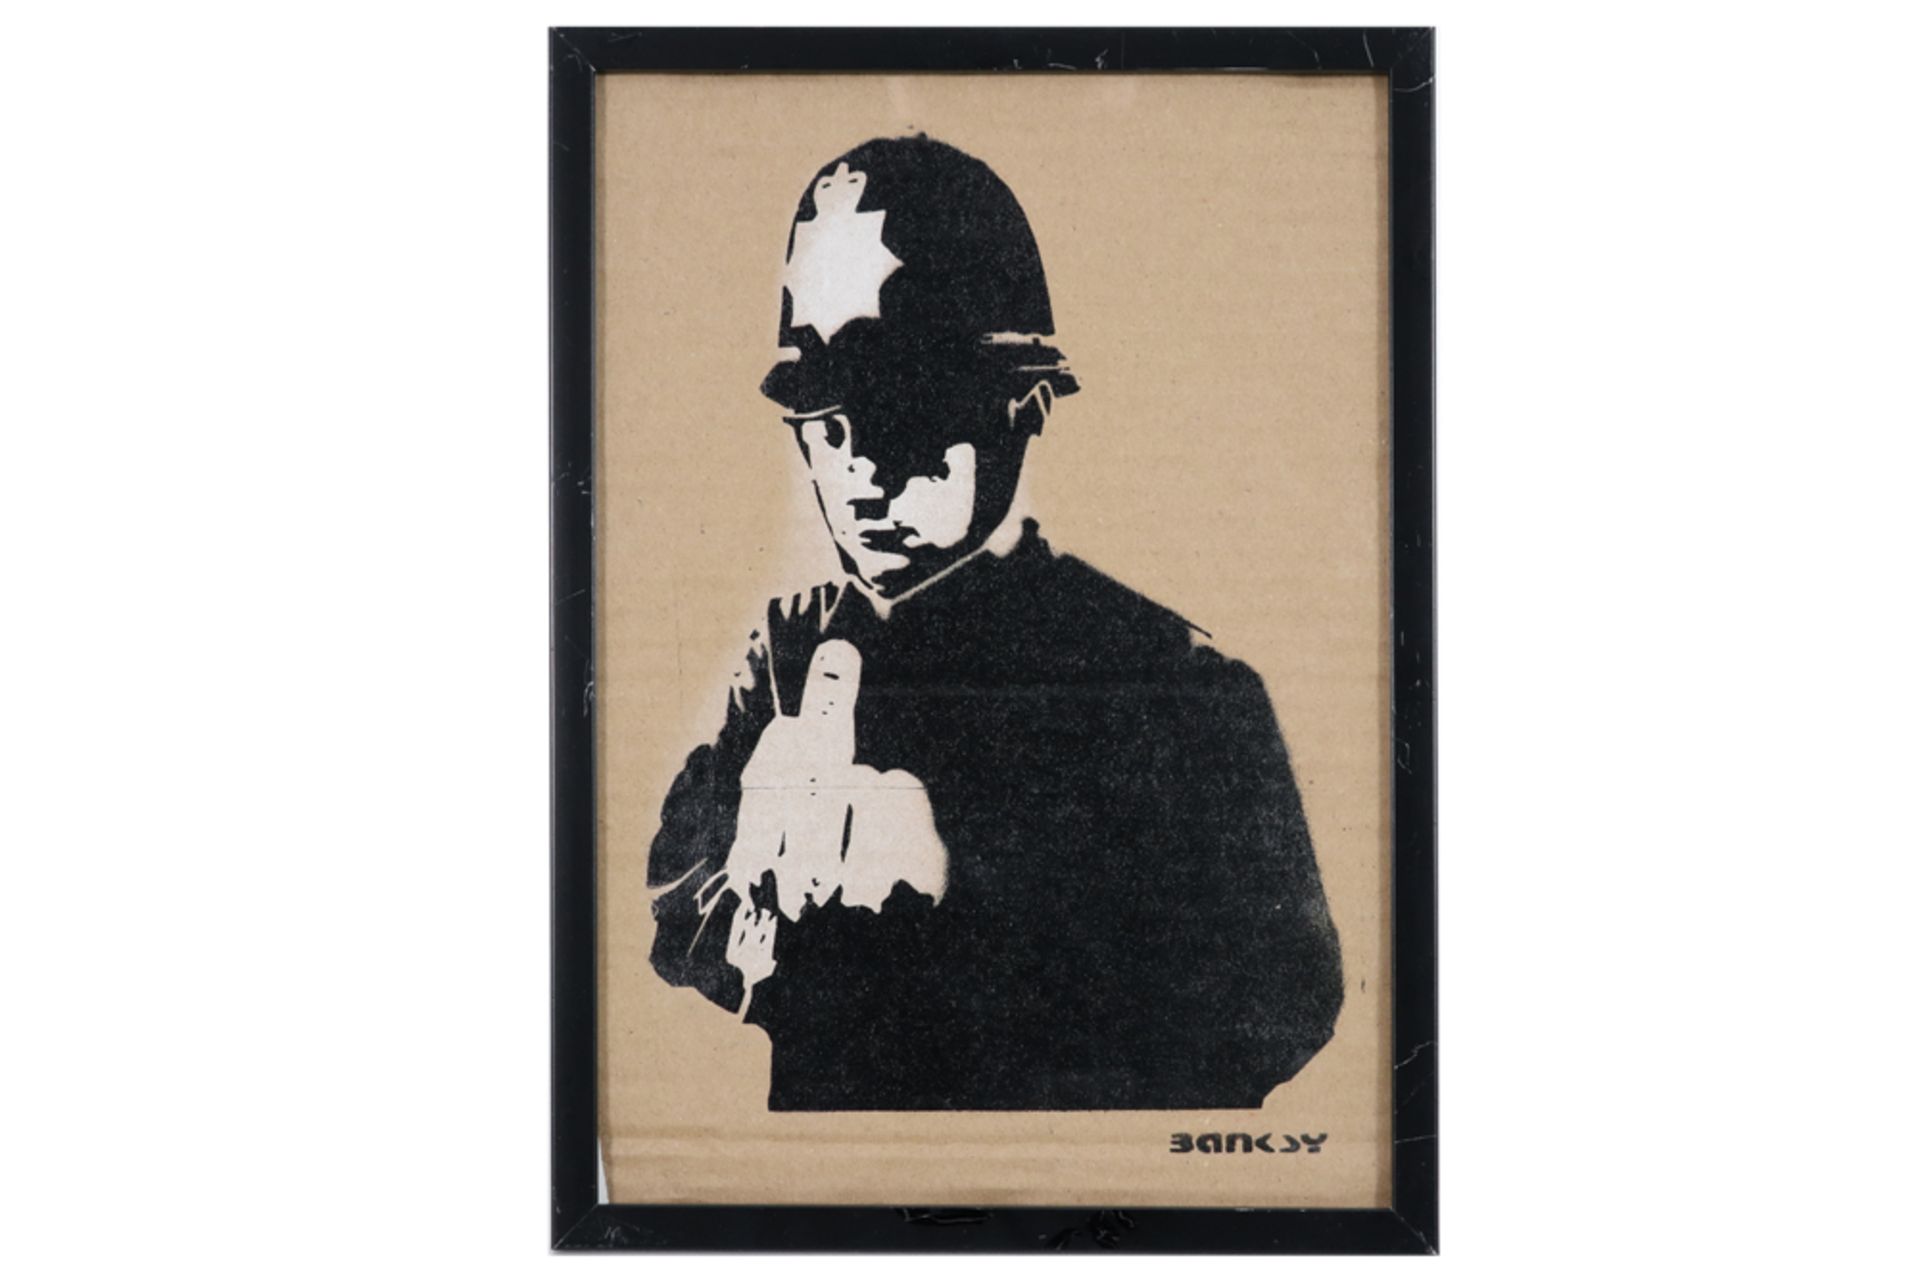 Banksy "Police Officer" stencil on carboard from the "Enjoy your free art" series - with on the back